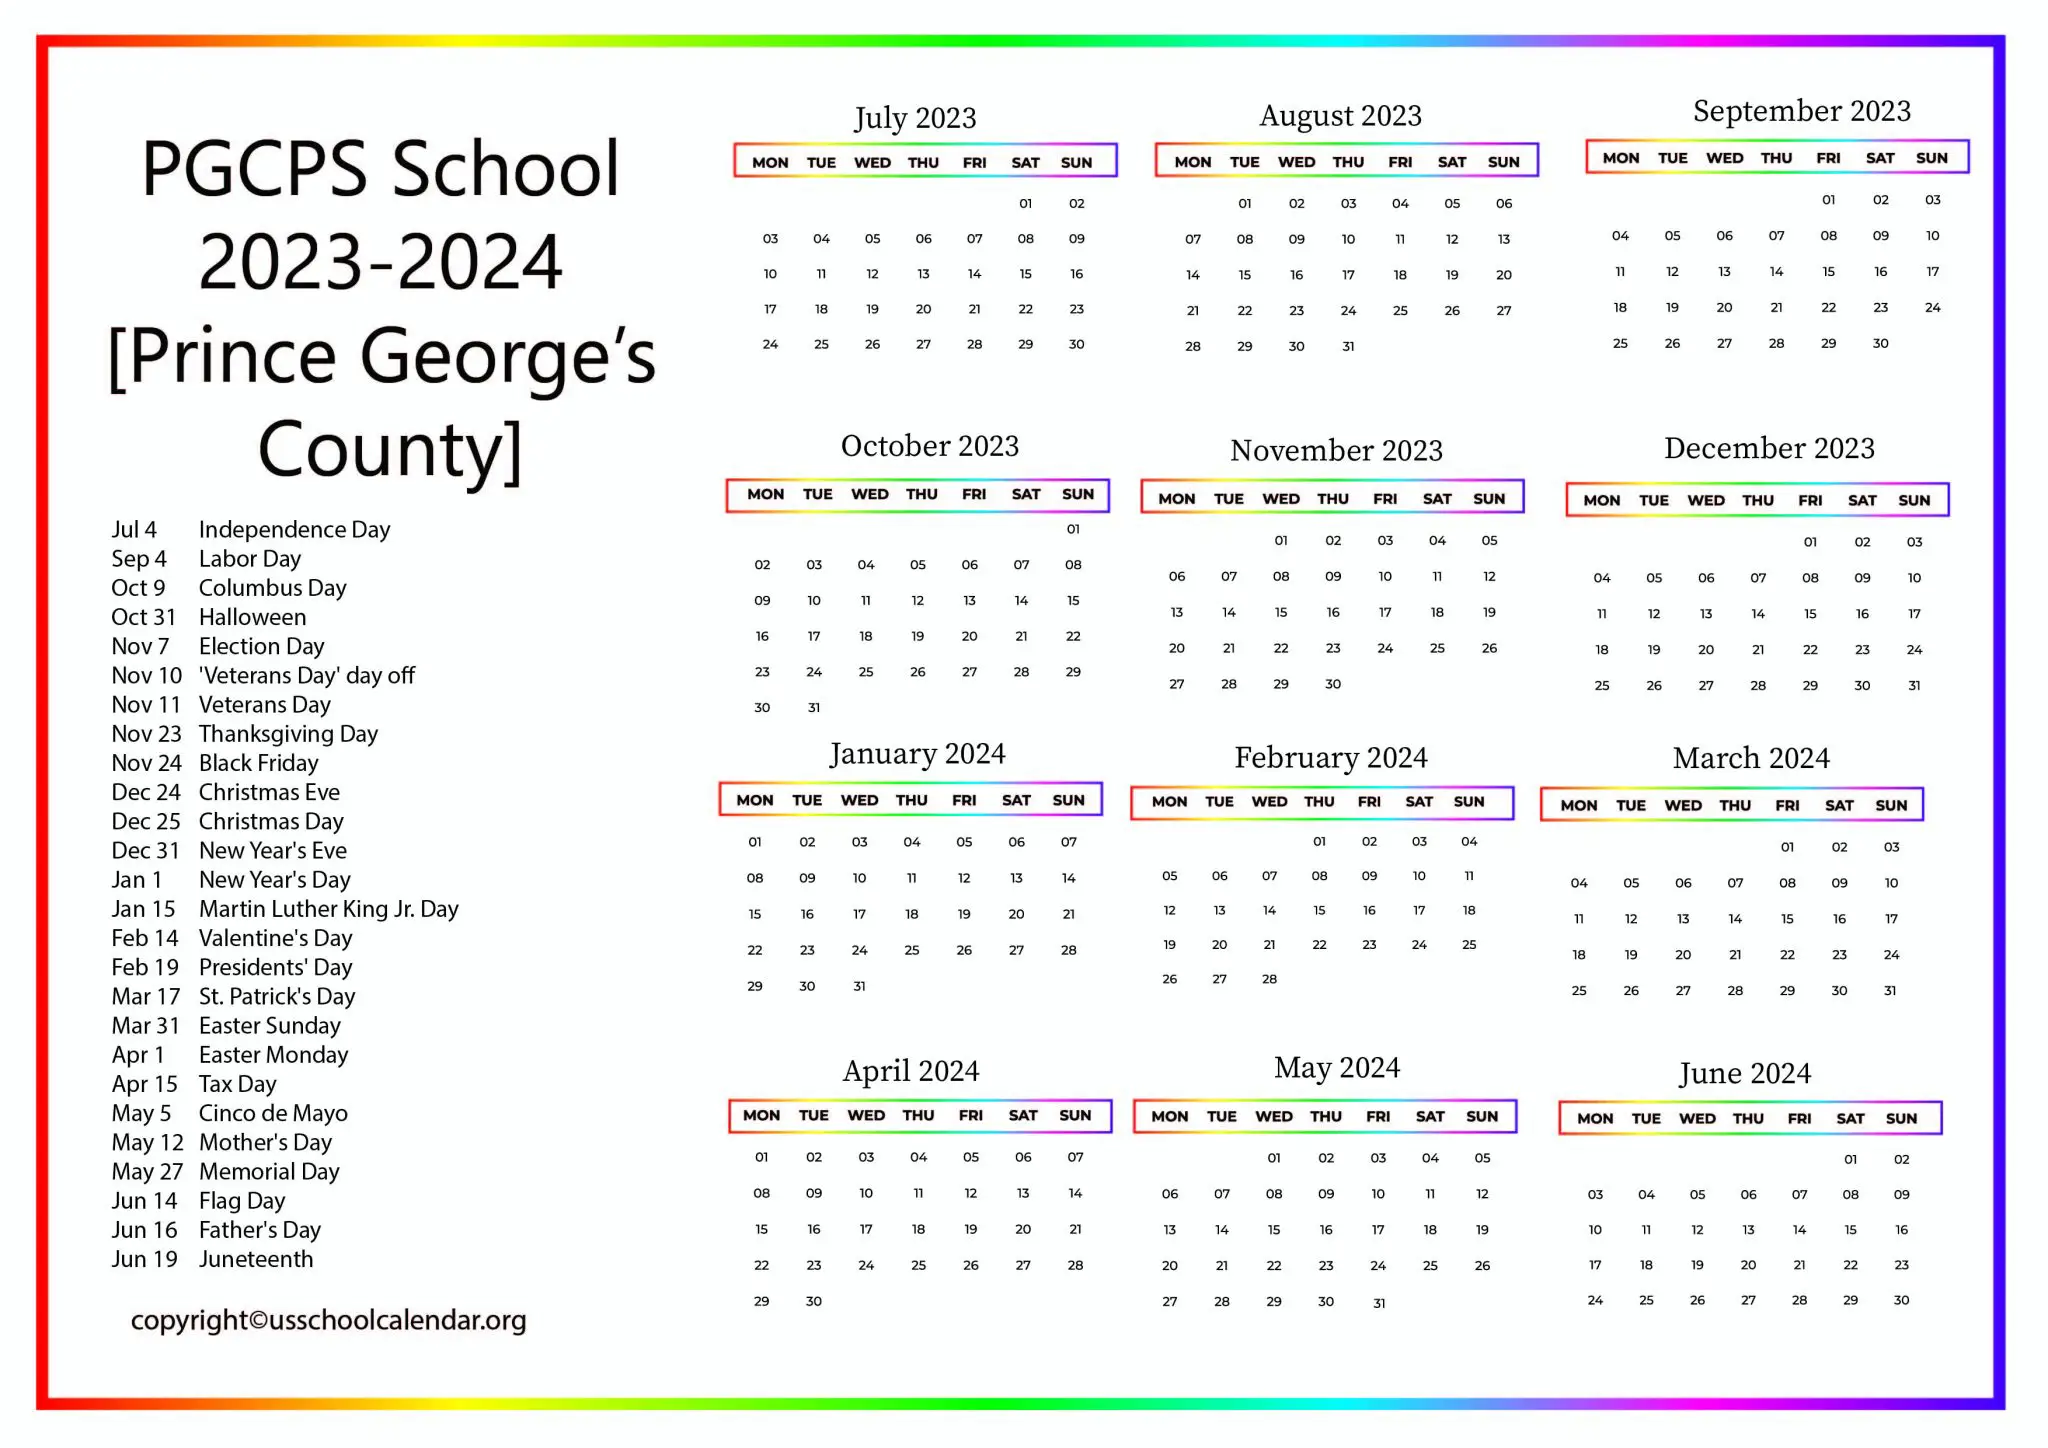 PGCPS School Calendar for 2023-2024 [Prince George’s County]